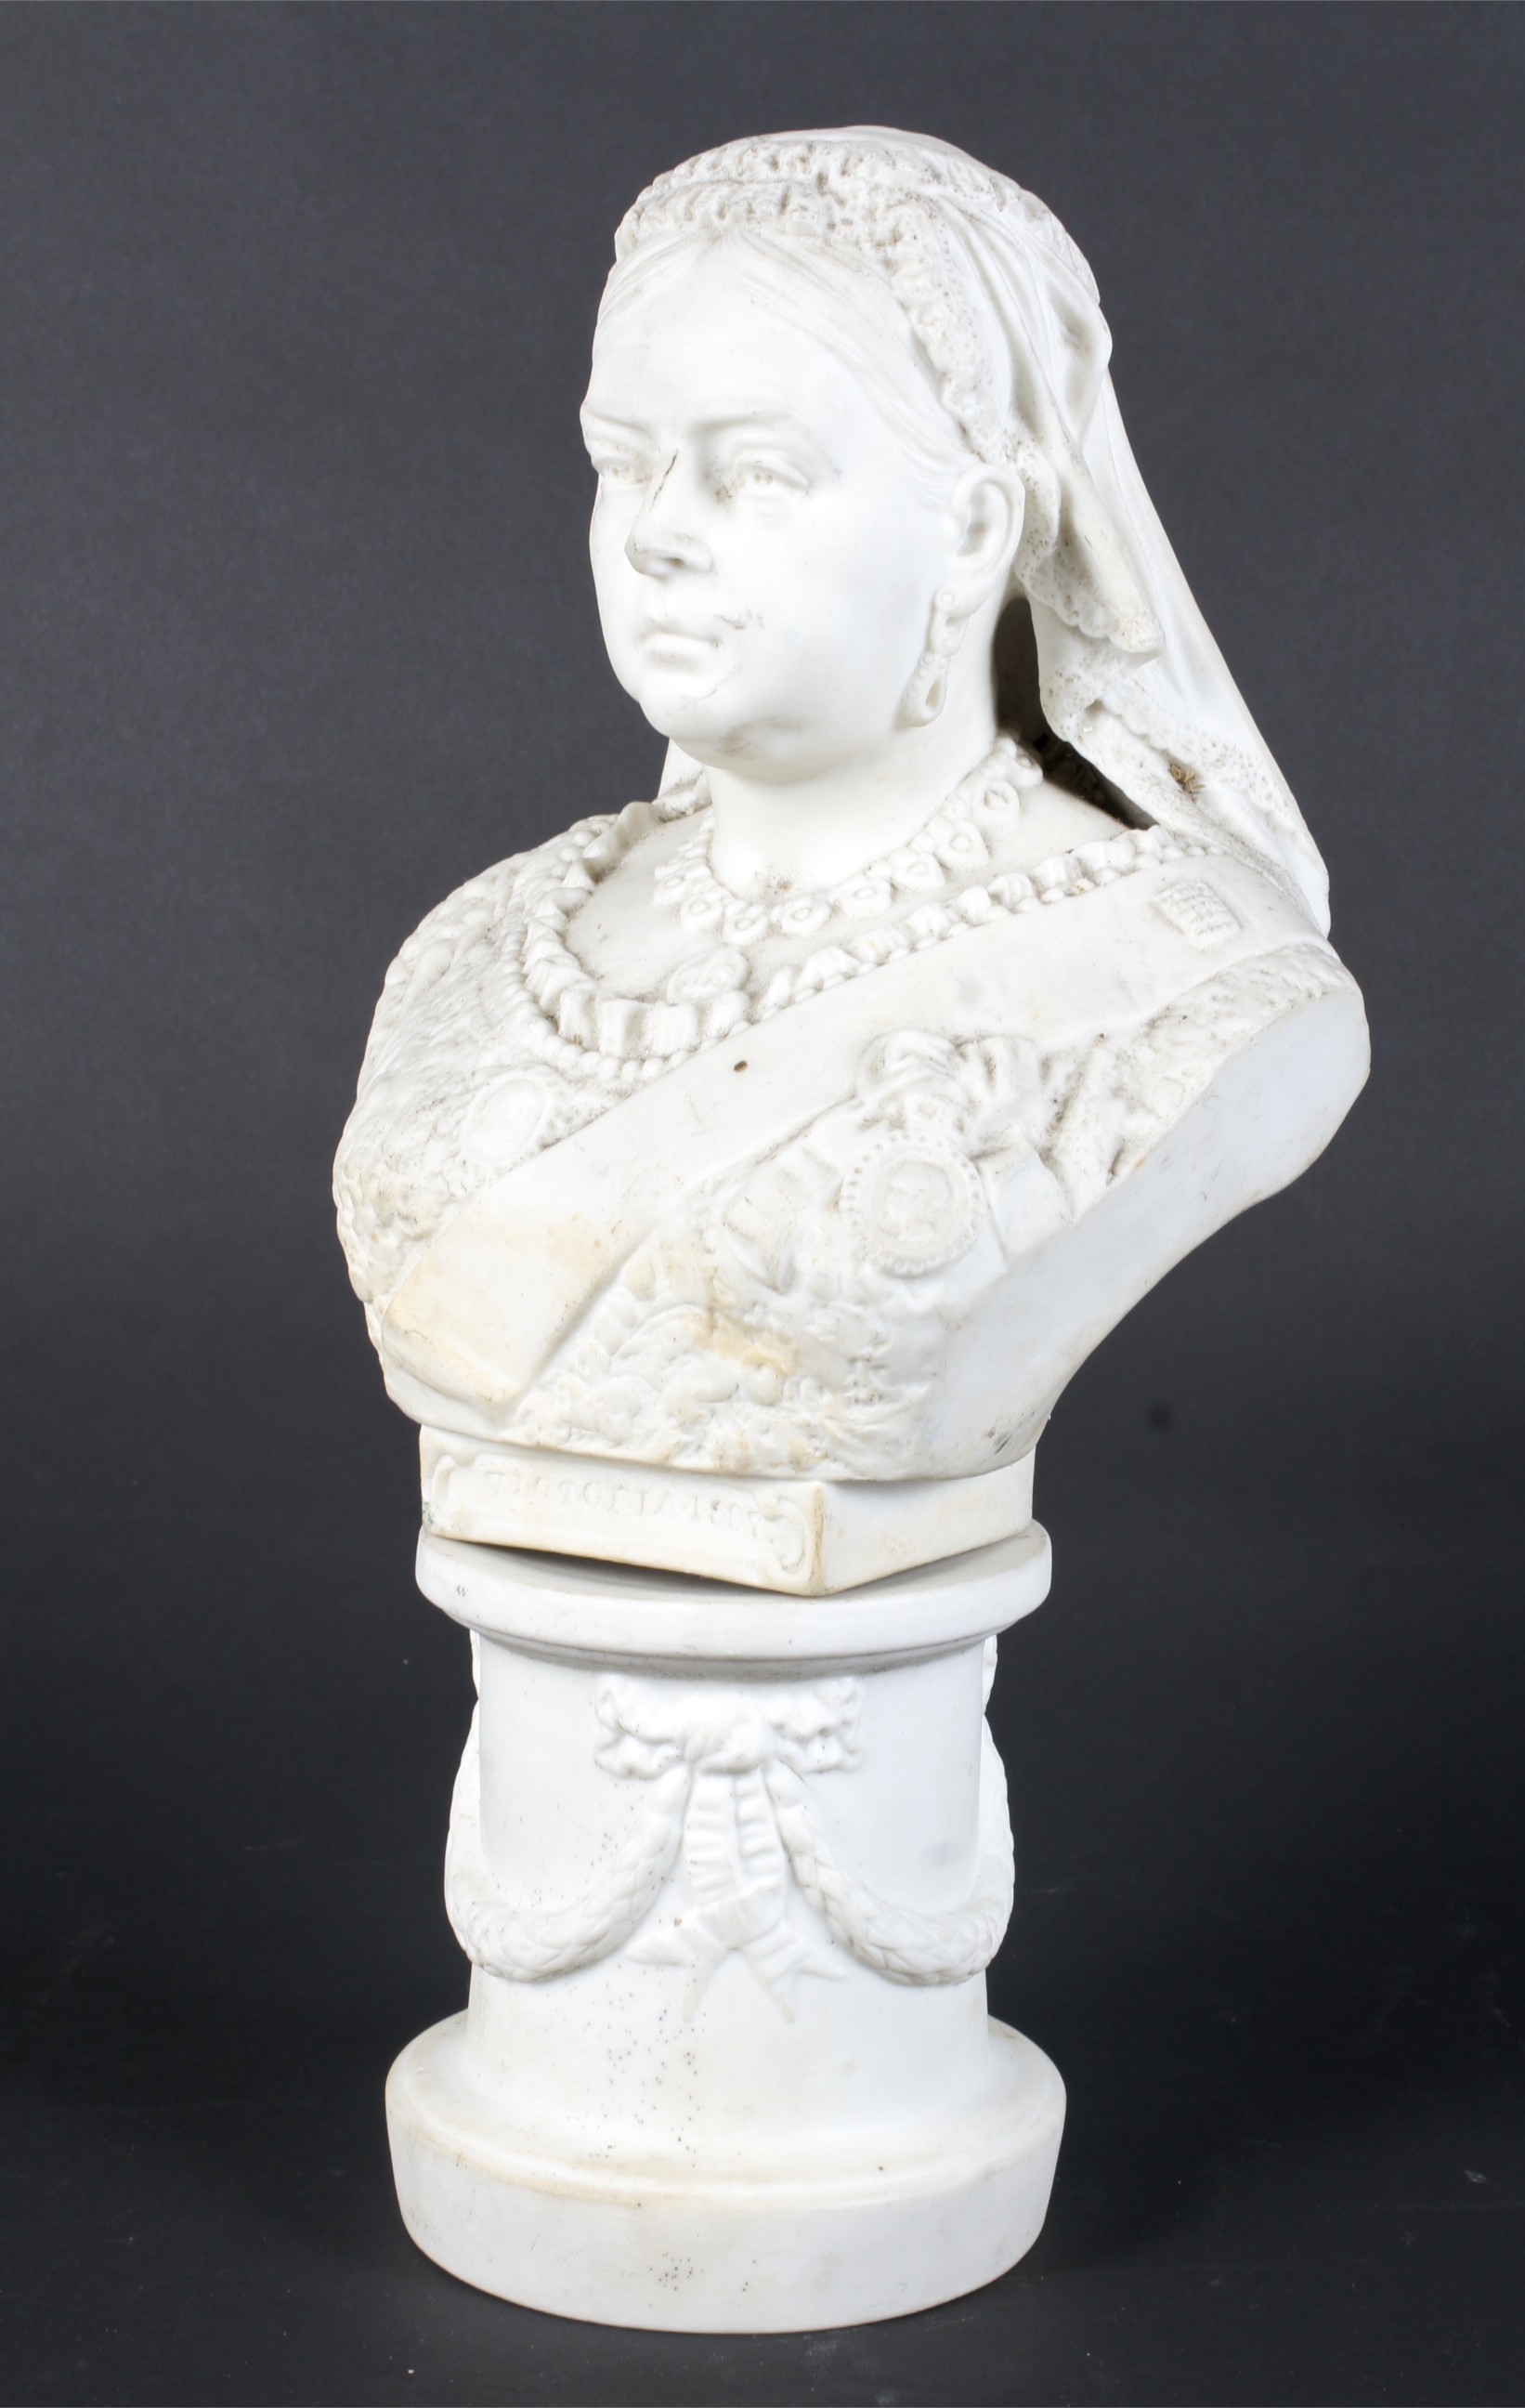 A 19th century Parian bust of Queen Victoria by Turner & Wood (Stoke-on-Trent).